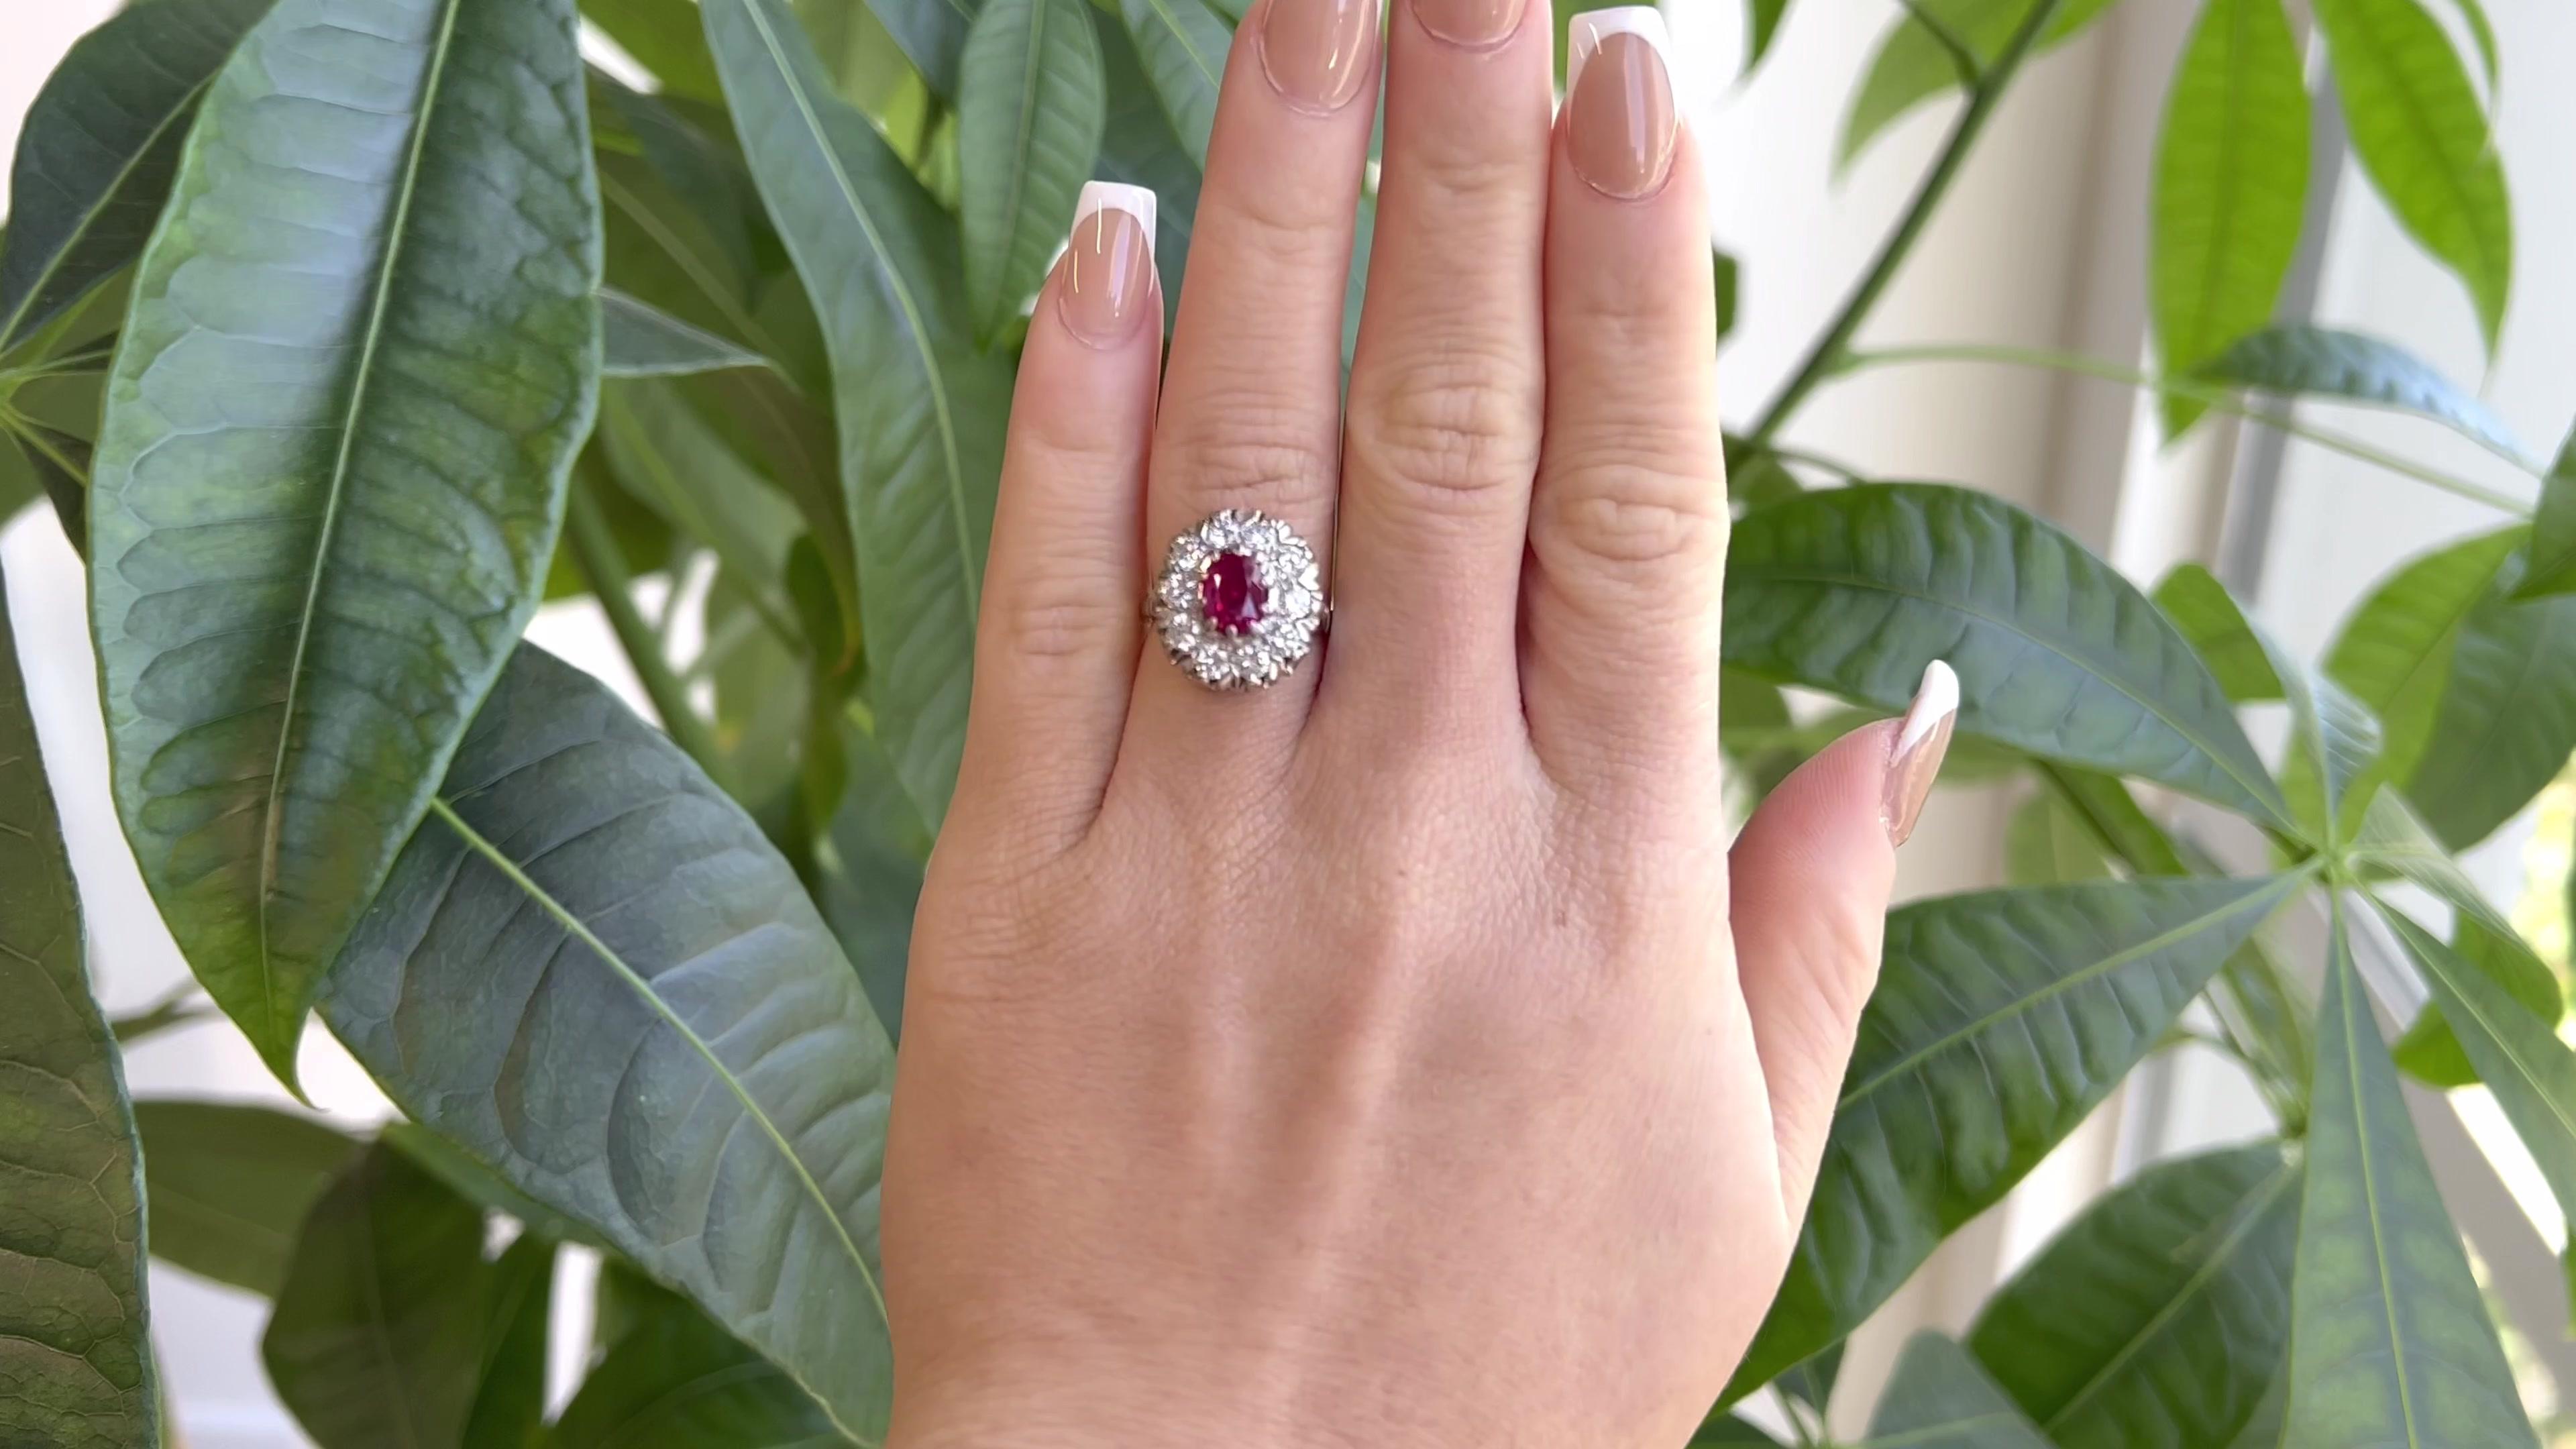 One Vintage French GIA No Heat Burma Ruby Diamond Platinum Ring. Featuring one GIA certified oval shaped ruby of approximately 1.39 carats, accompanied with certificate #2225403993 stating the ruby is of Burma origin with no indication of being